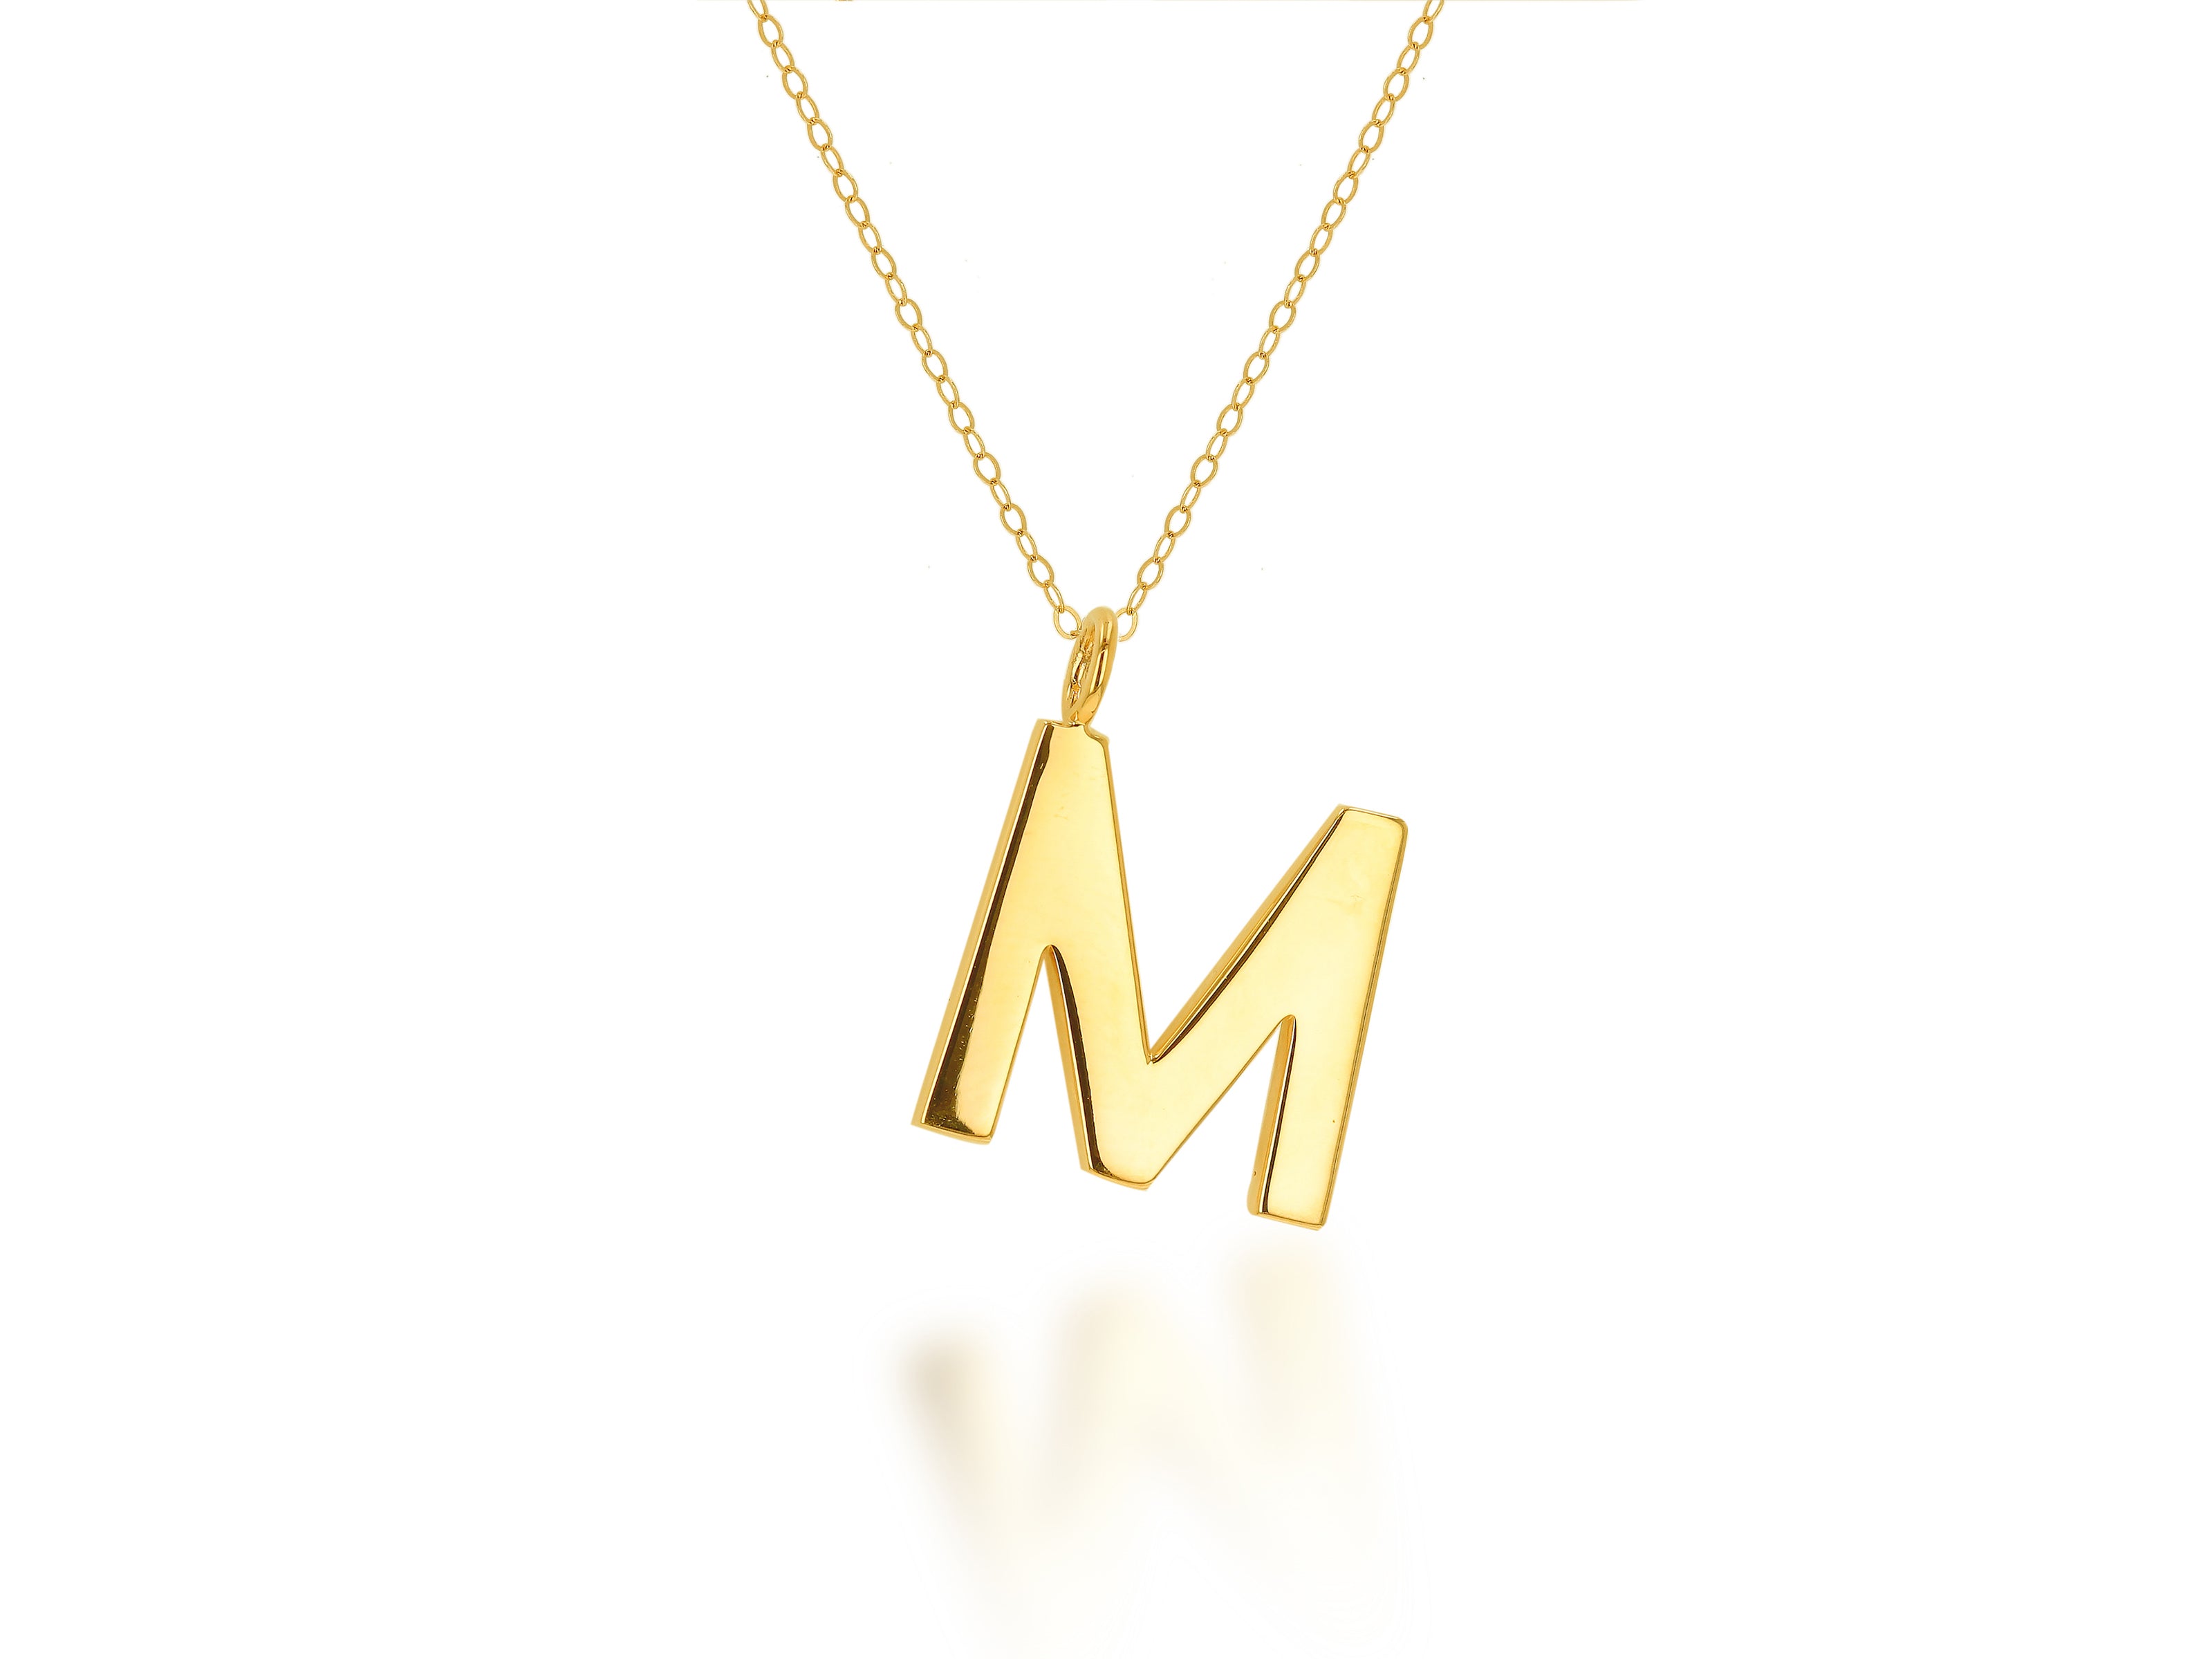 Oversized Block Letter Charm With Cable Chain